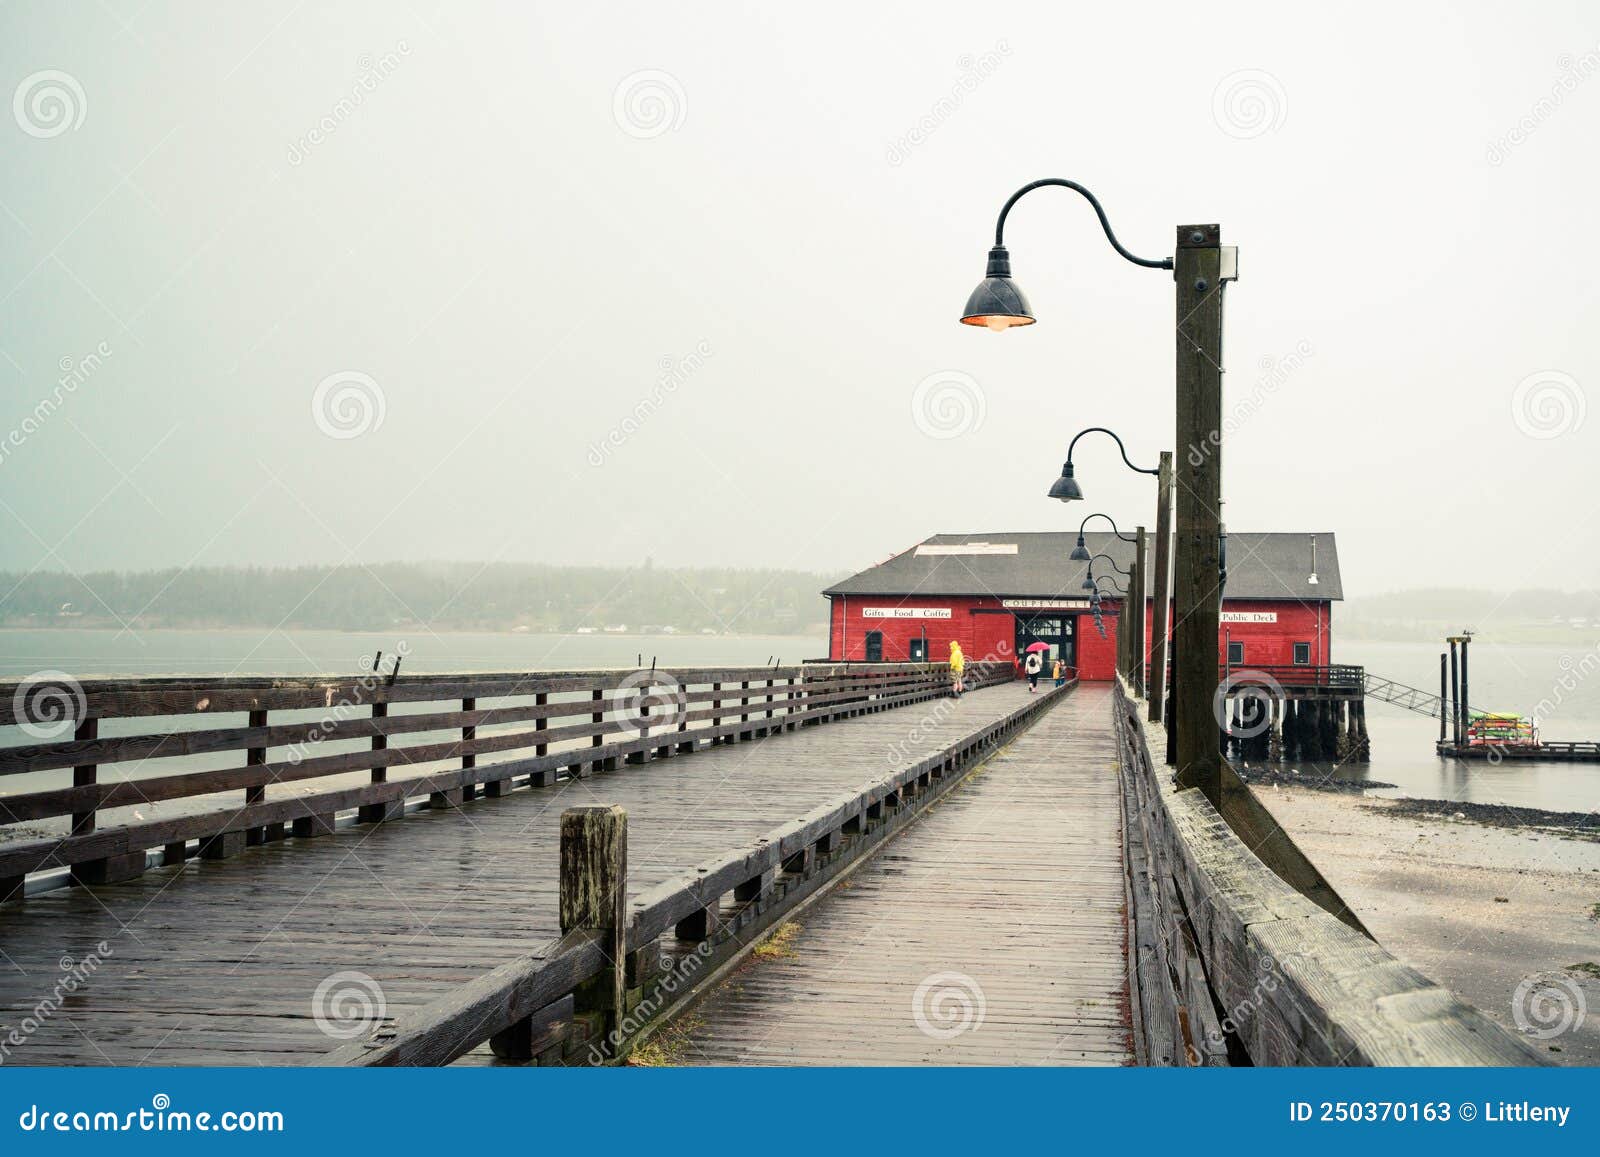 coupeville washington on whidbey island with pier and historic building